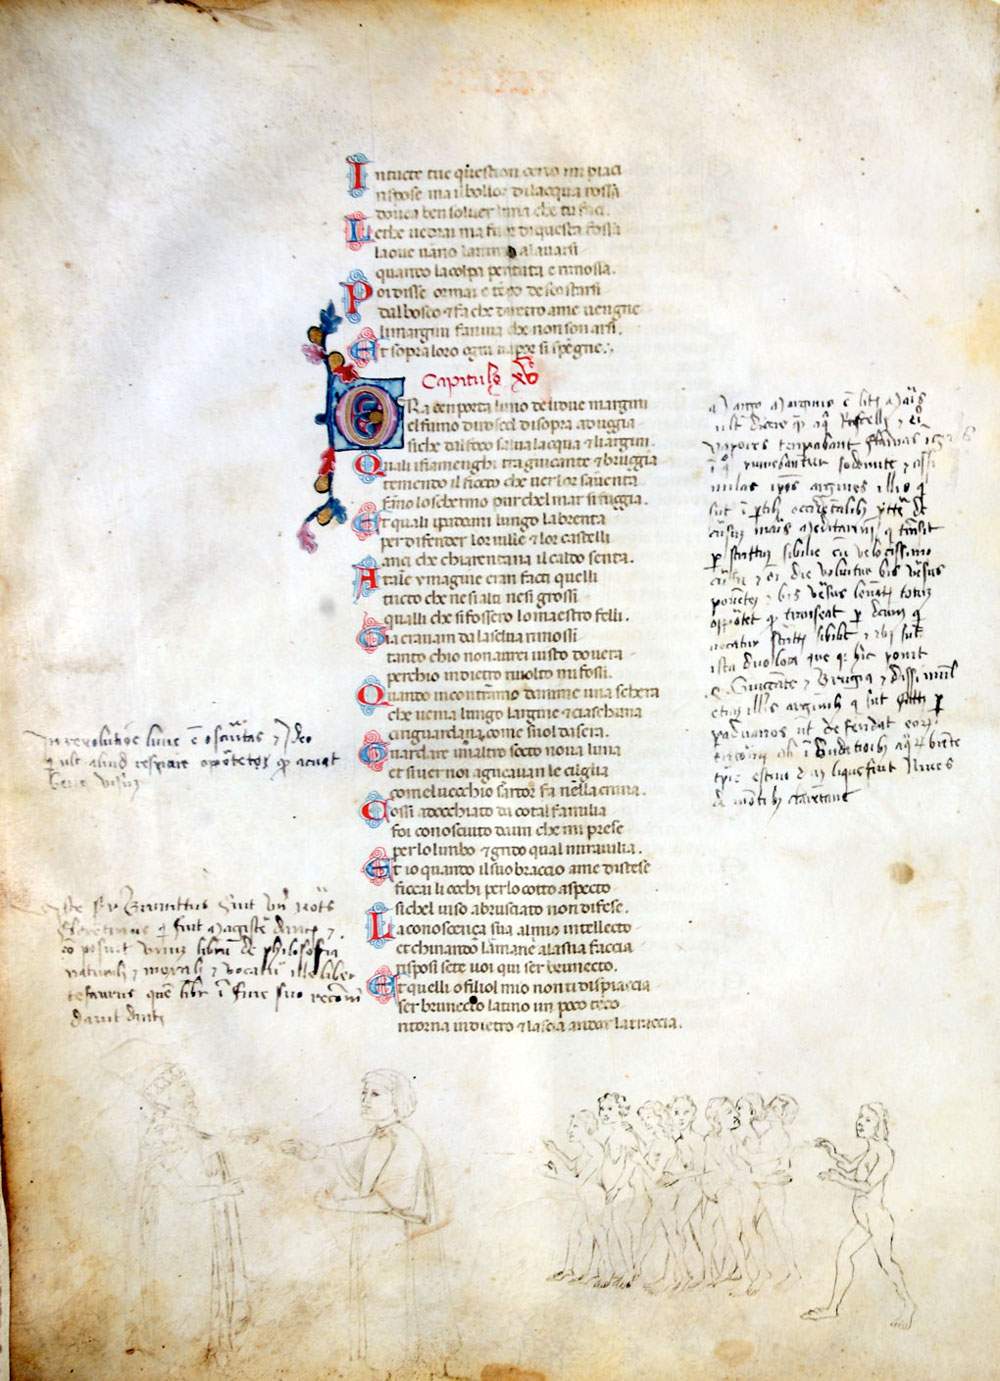 Dantedì, Naples National Library presents one of the earliest illustrated manuscripts of the Divine Comedy